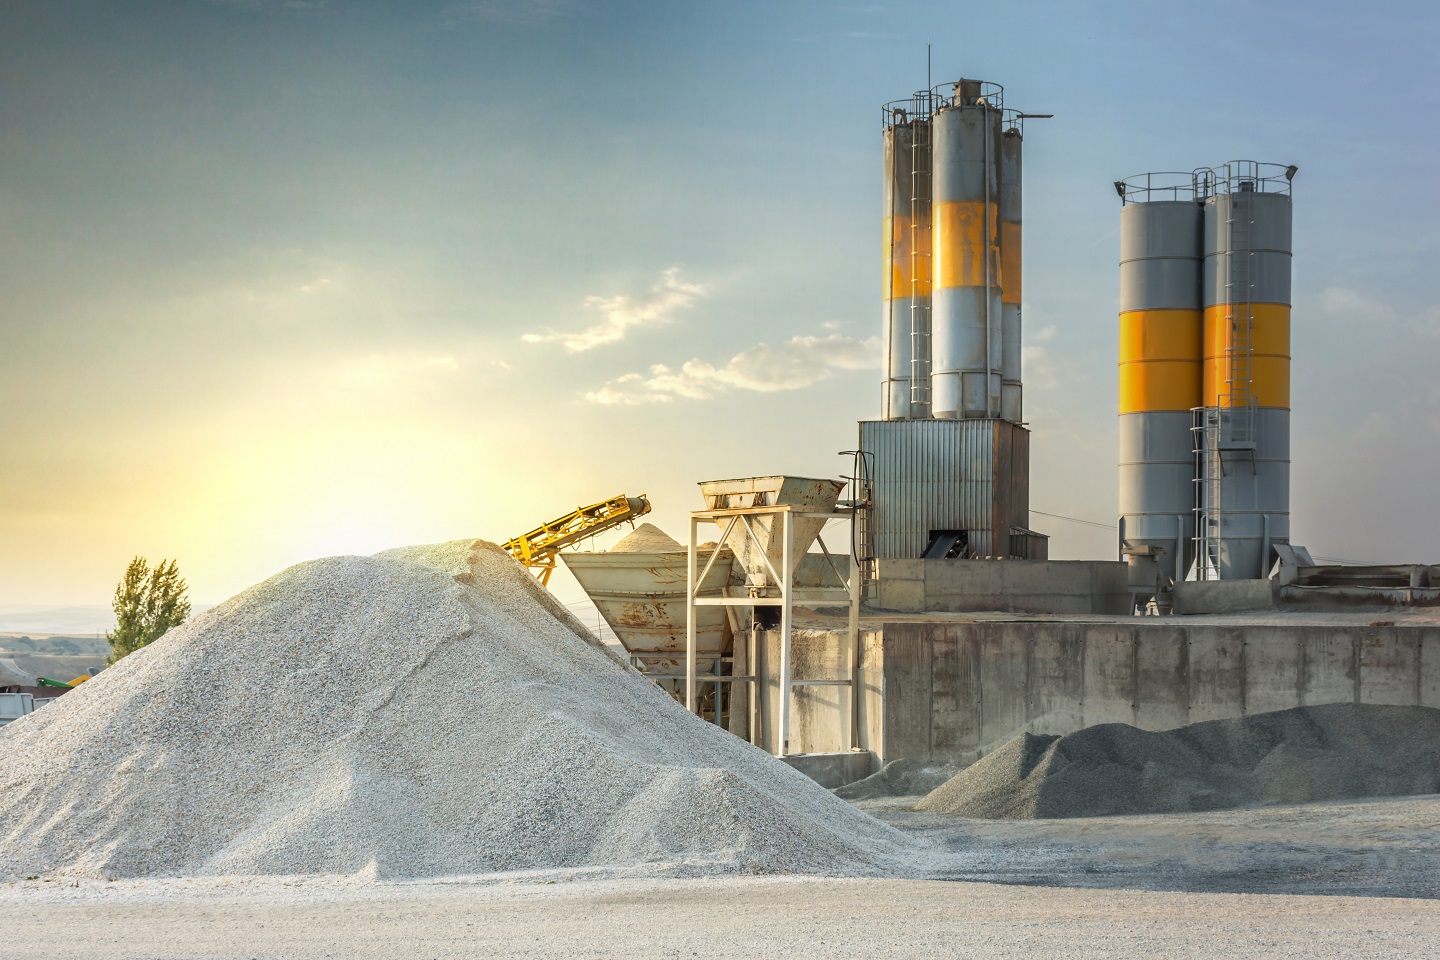 Sand,Destined,To,The,Manufacture,Of,Cement,In,A,Quarry